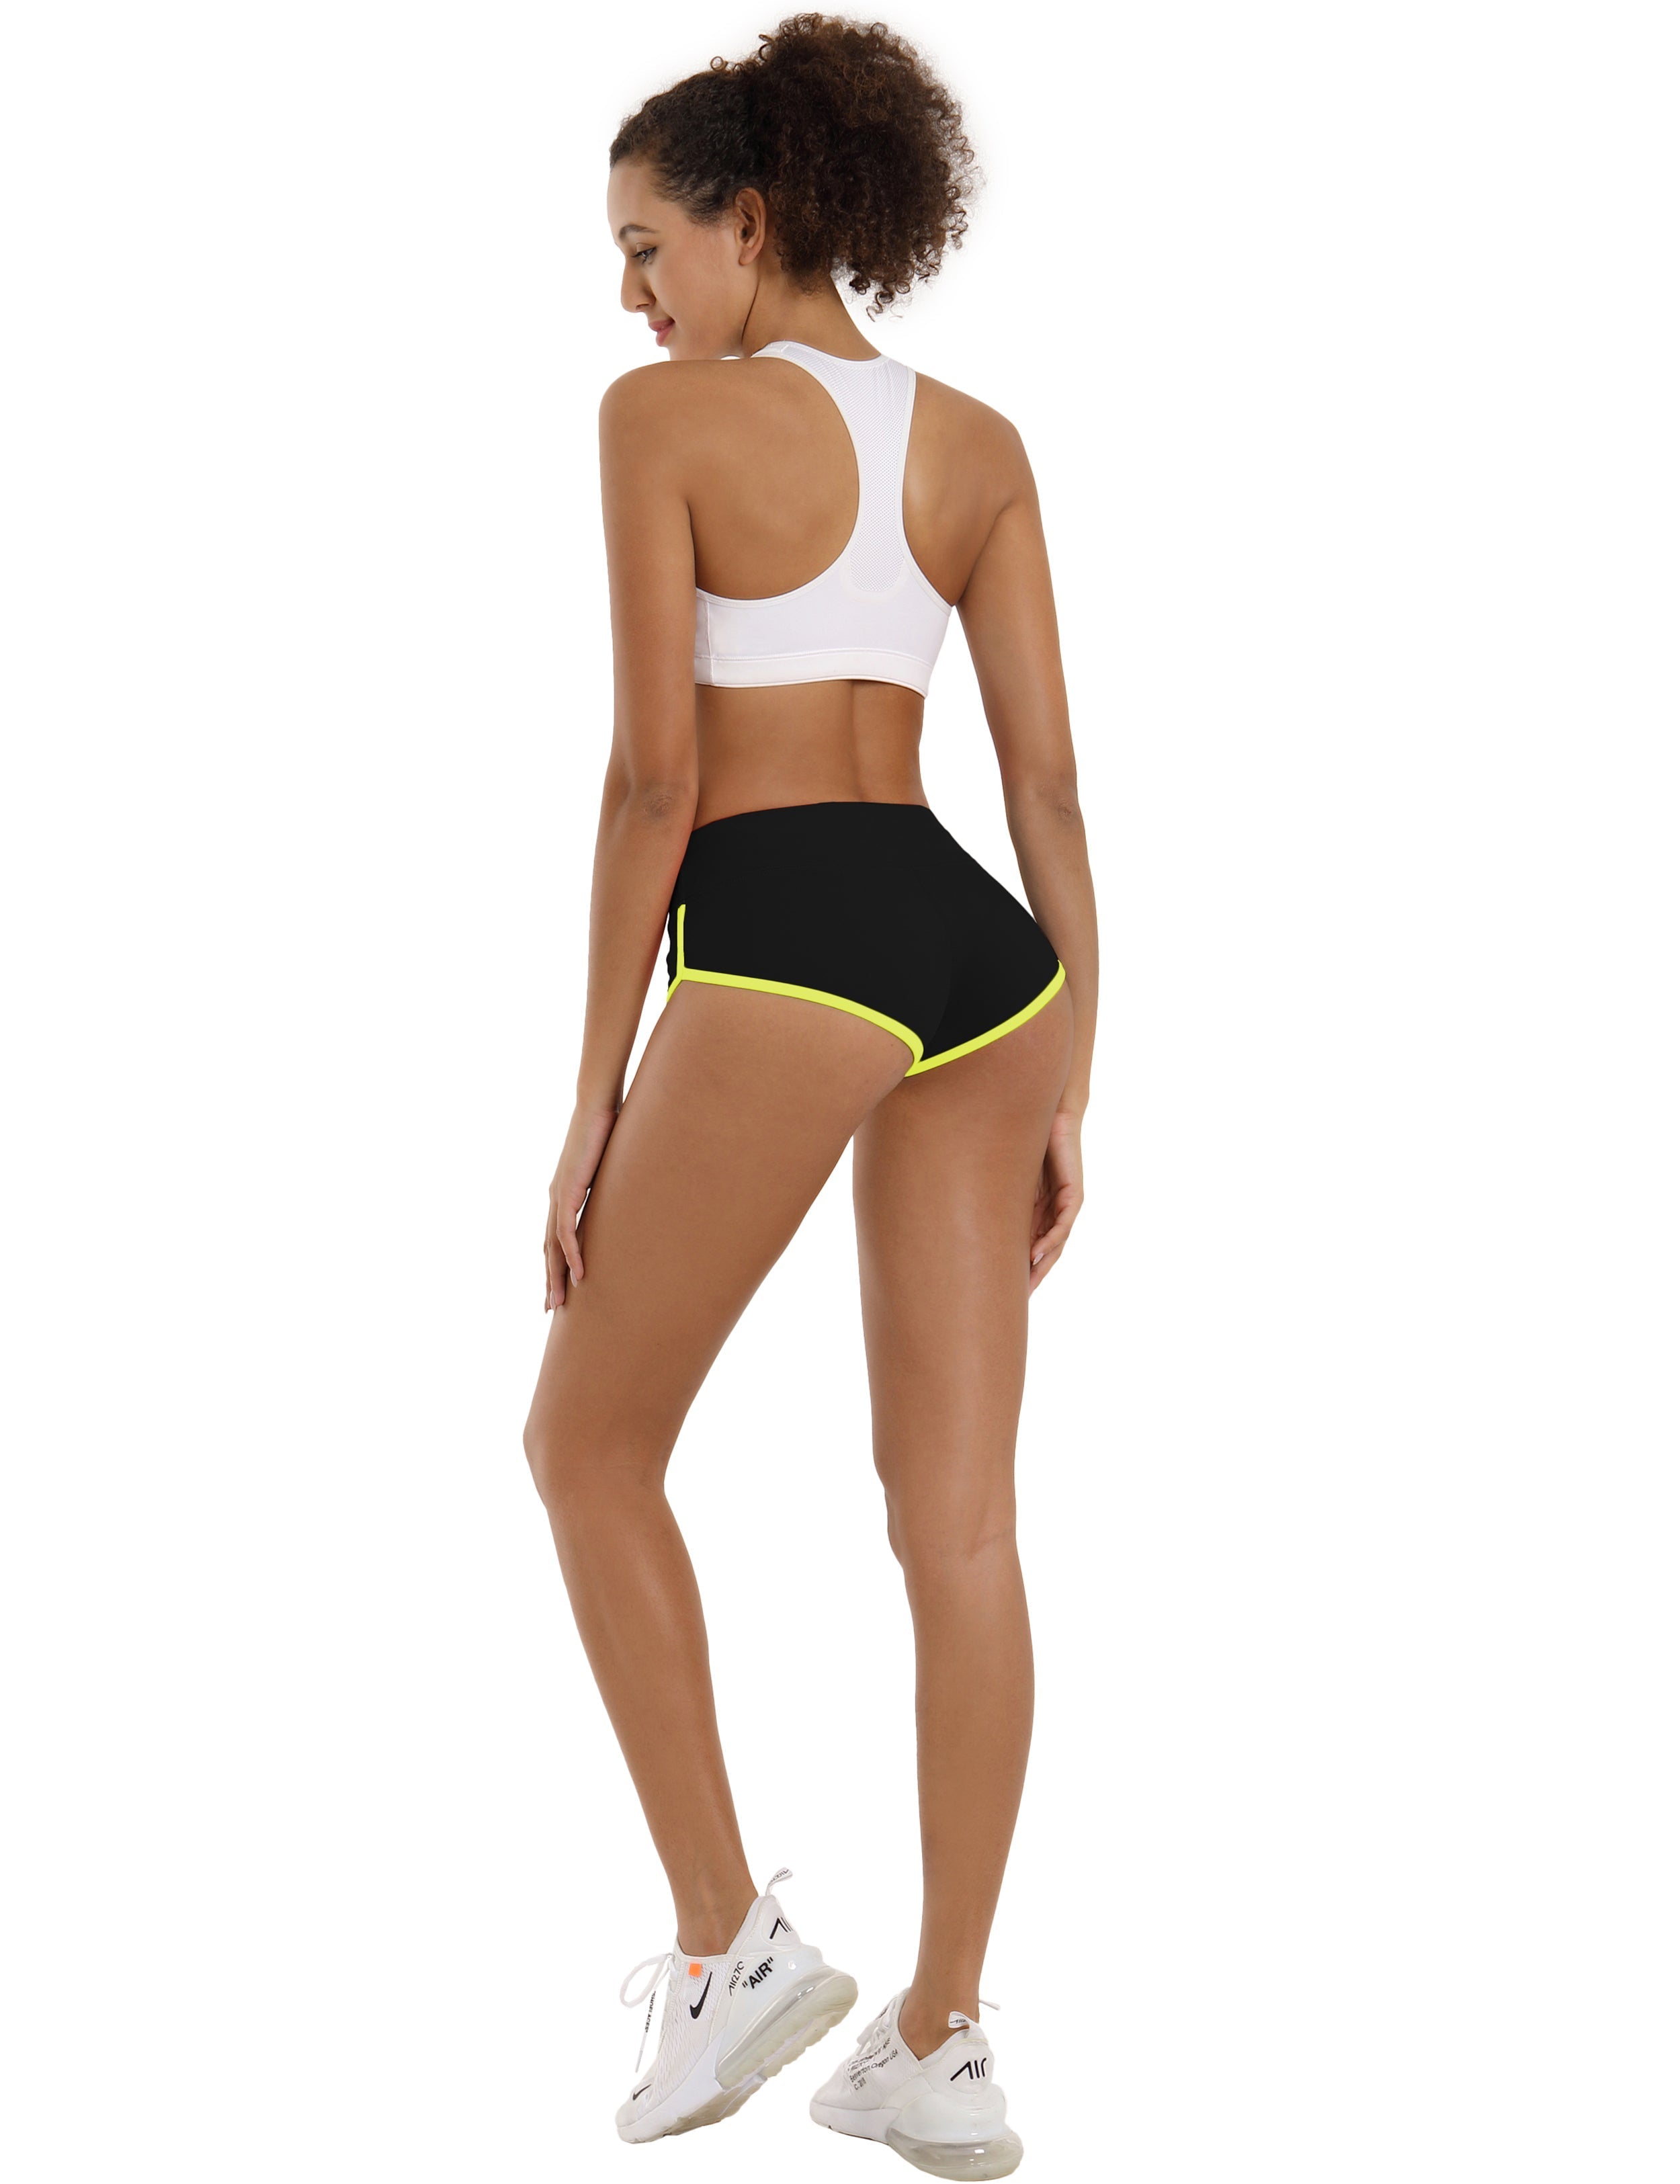 Sexy Booty Plus Size Shorts black_fluorescentyellow Sleek, soft, smooth and totally comfortable: our newest sexy style is here. Softest-ever fabric High elasticity High density 4-way stretch Fabric doesn't attract lint easily No see-through Moisture-wicking Machine wash 75%Nylon/25%Spandex